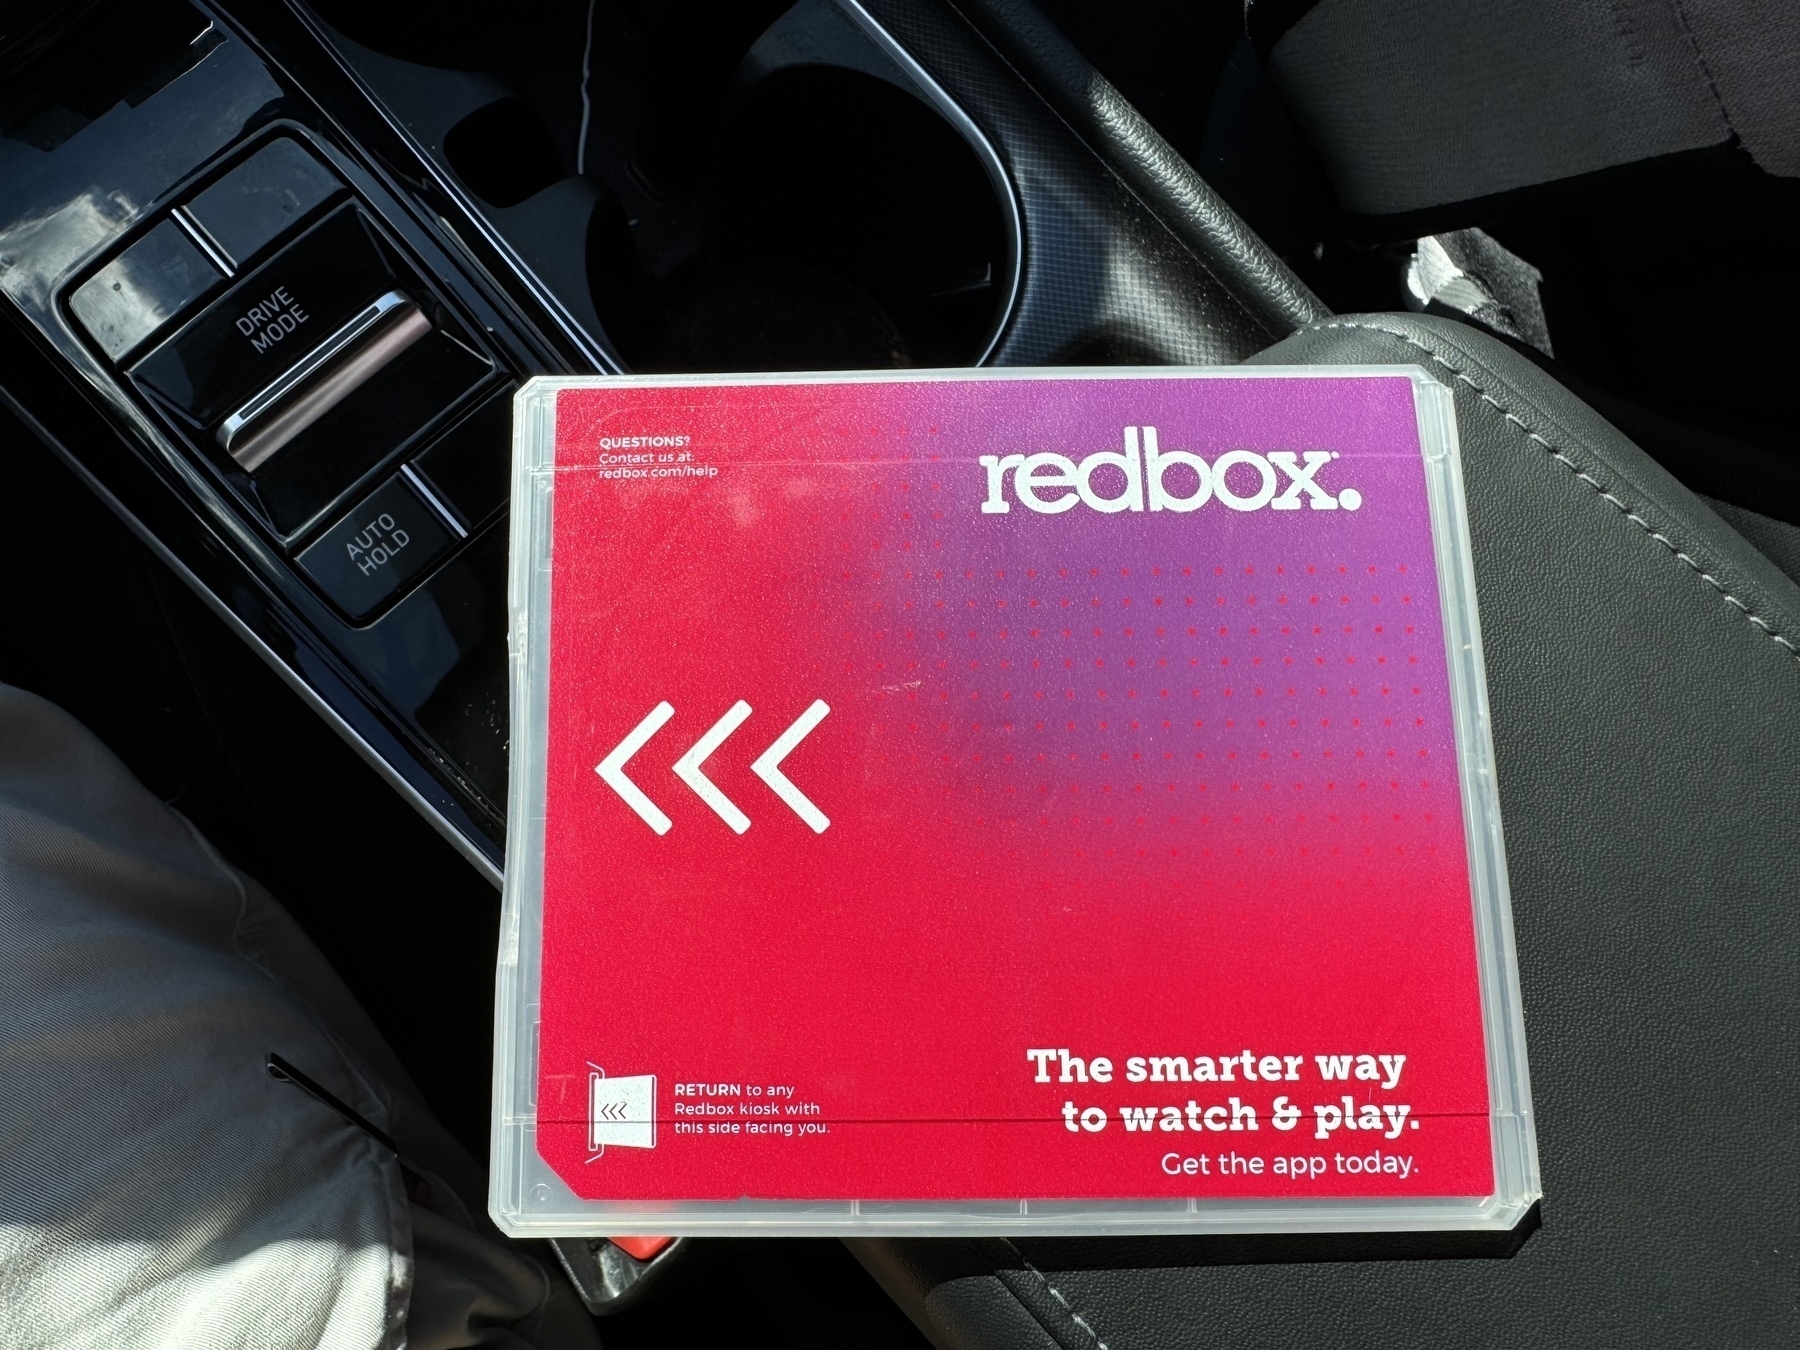 A Redbox DVD case is resting on a car seat, next to some car controls, promoting the convenience of returning it to any Redbox location or dropping it in the slot.